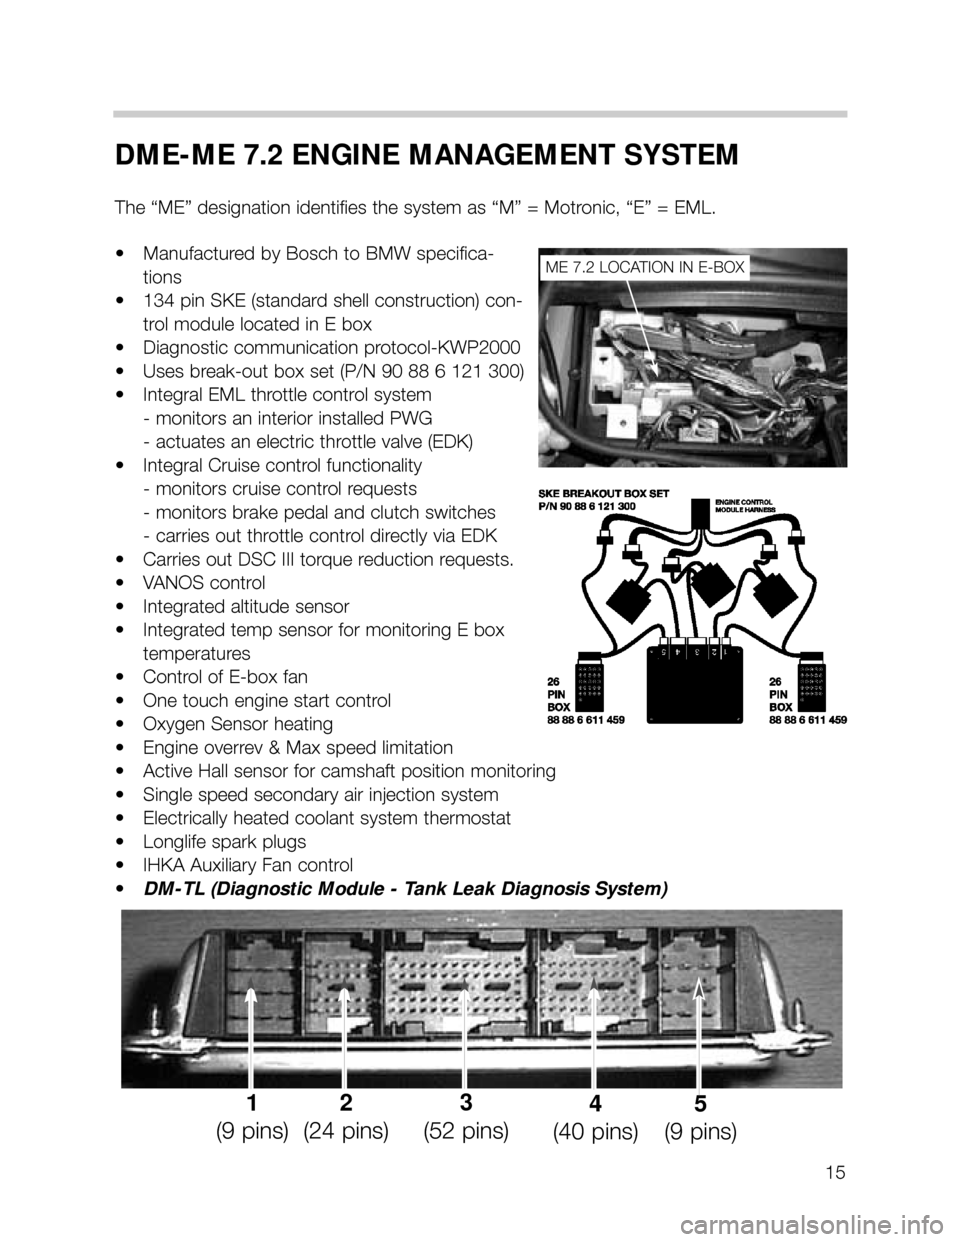 BMW X5 1999 E53 M62TU Engine Workshop Manual 15
DME-ME 7.2 ENGINE MANAGEMENT SYSTEM
The “ME” designation identifies the system as “M” = Motronic, “E” = EML.
• Manufactured by Bosch to BMW specifica-
tions
• 134 pin SKE (standard 